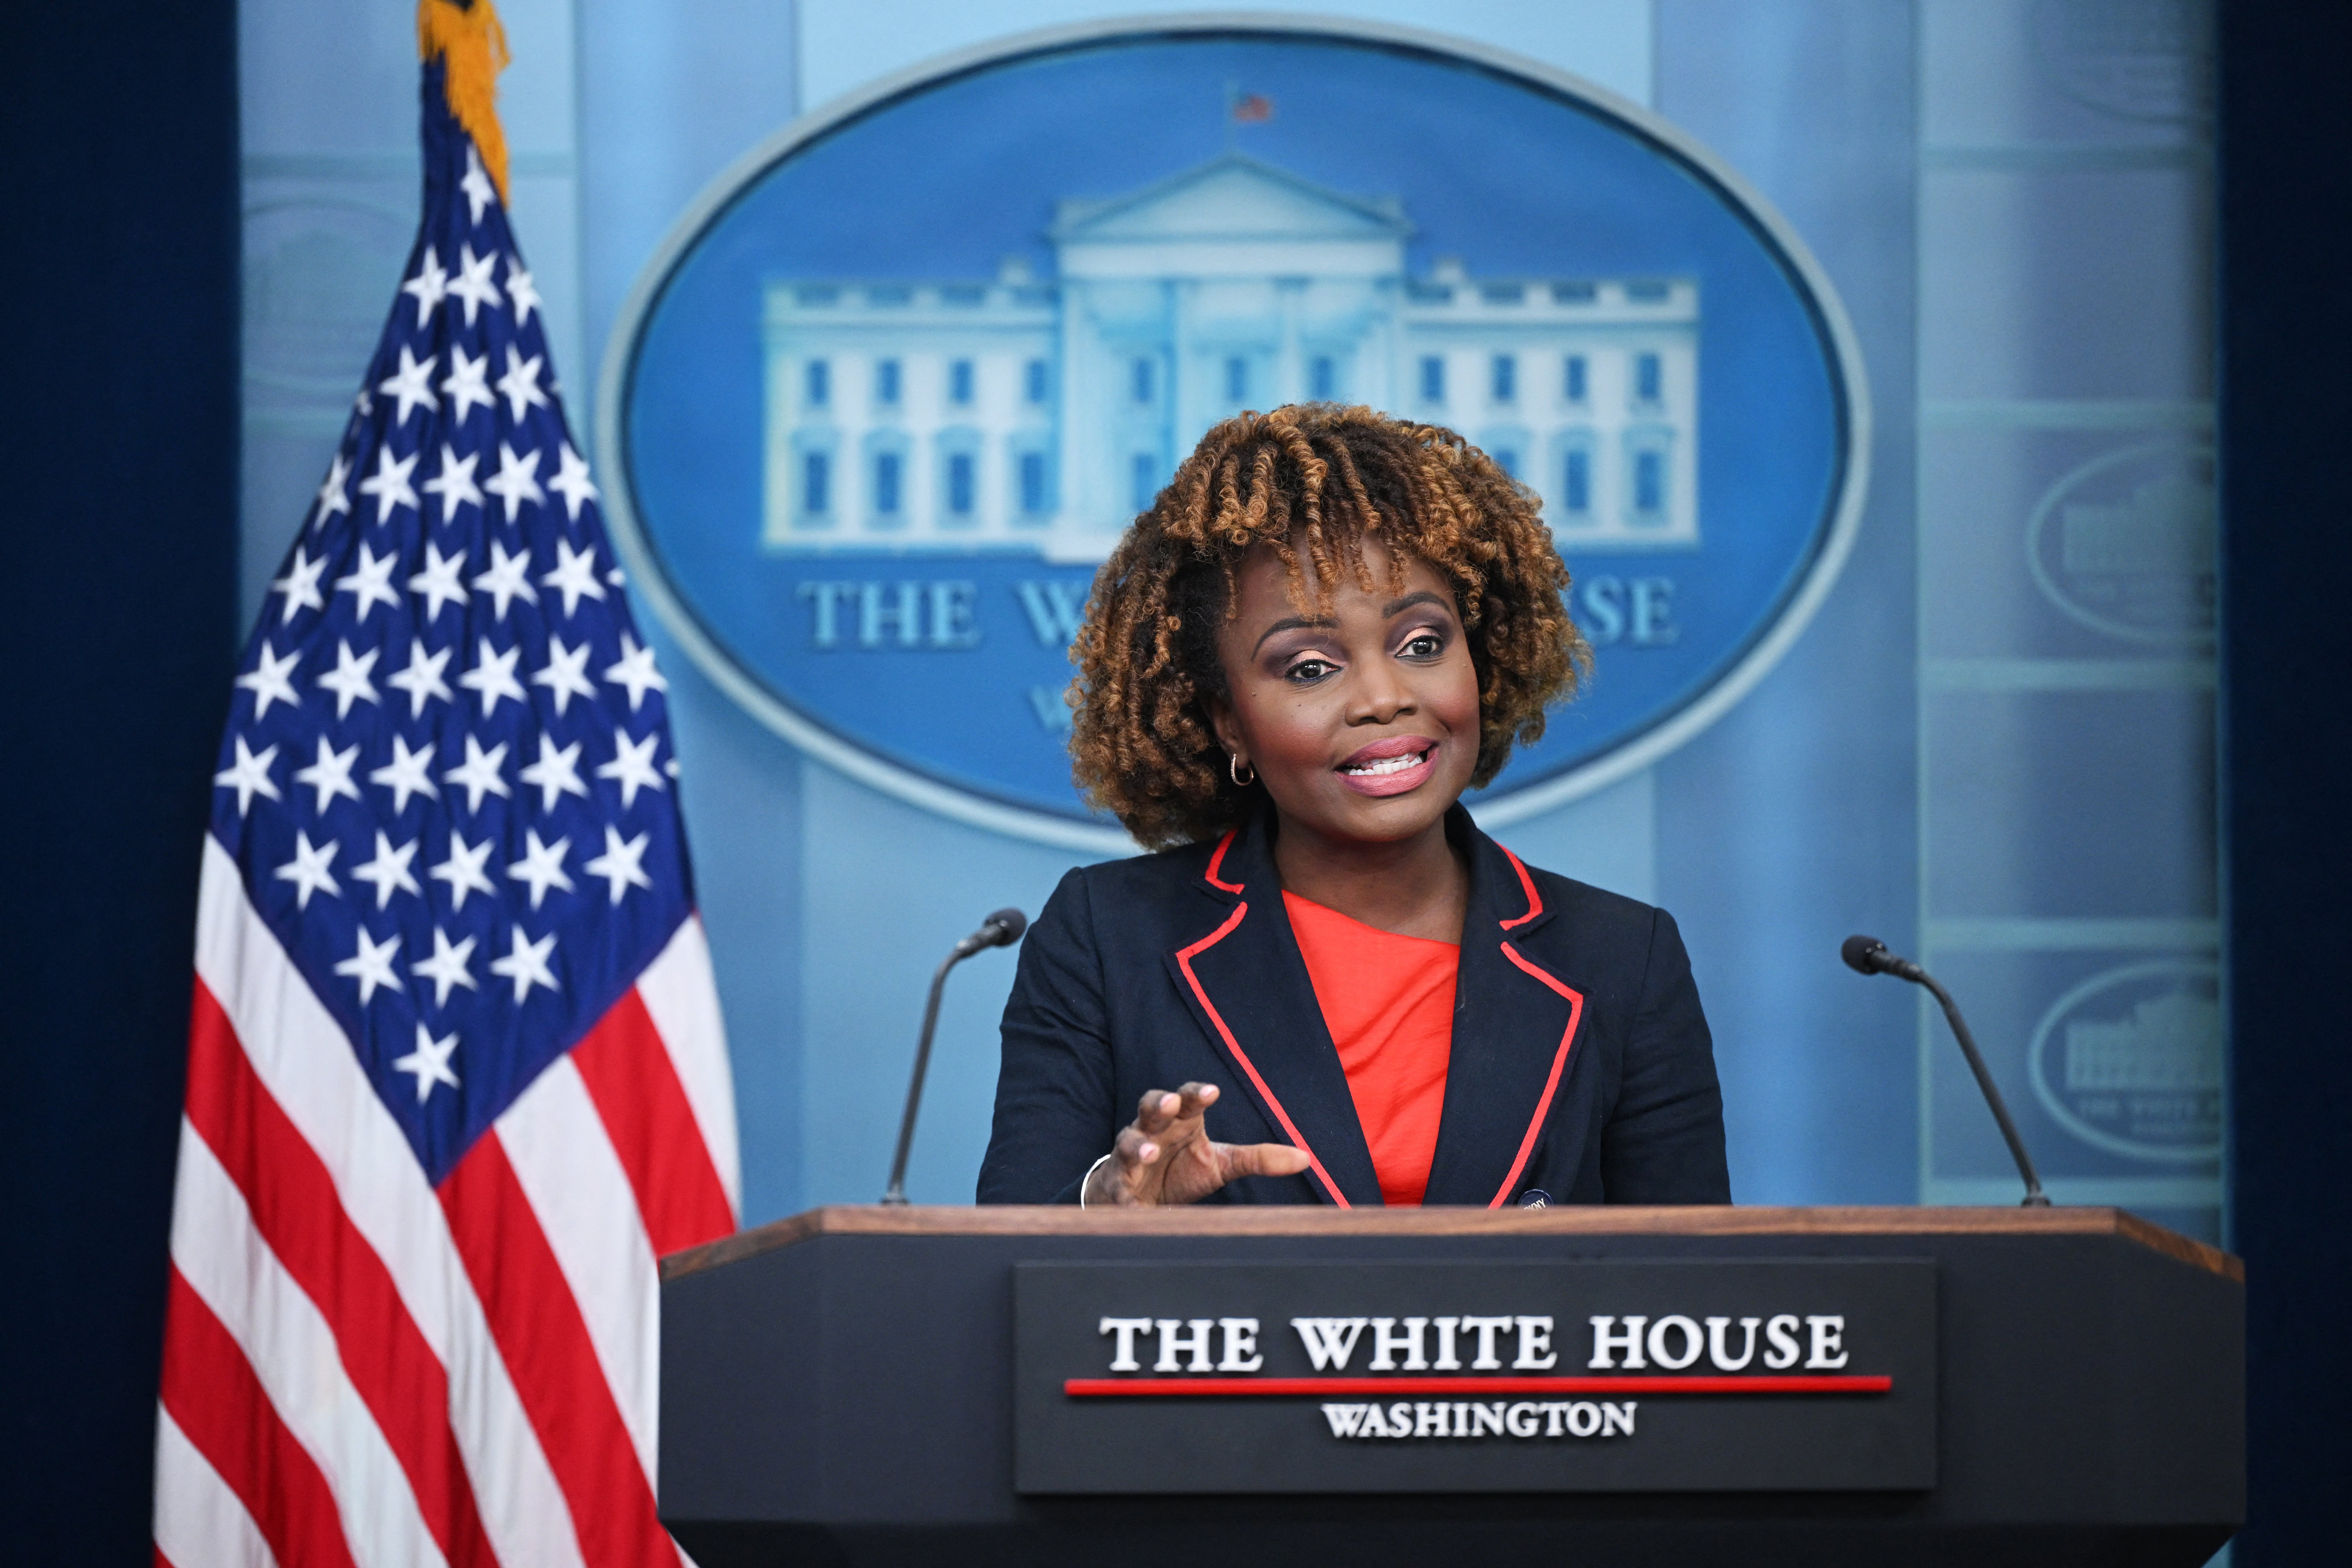 White House press secretary Karine Jean-Pierre also addressed the announcement on Friday